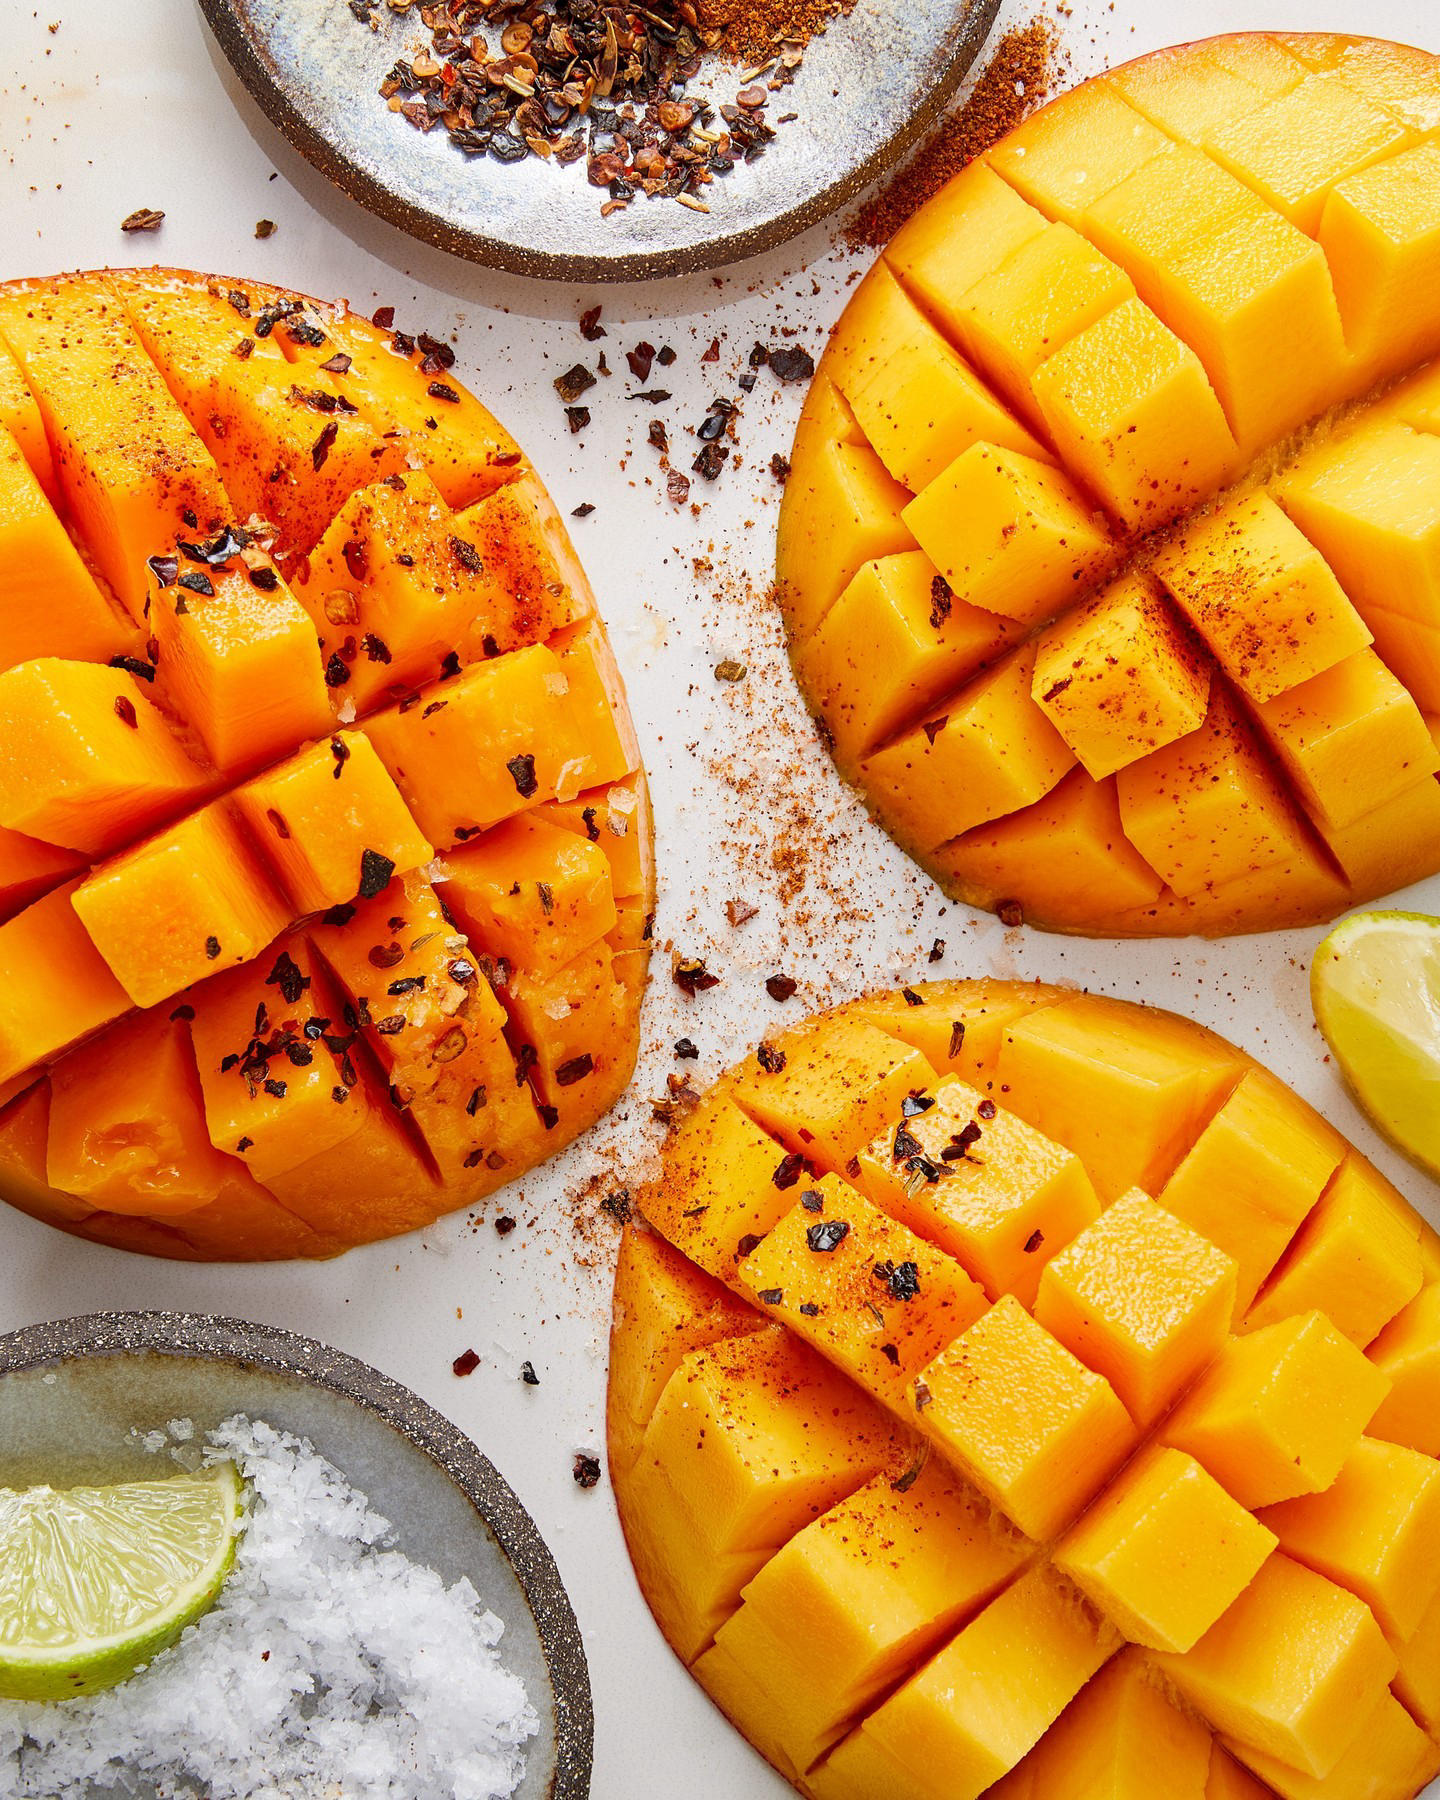 image  1 Harrods Food - Our gloriously juicy mangoes taste all the sweeter with a sprinkle of sea salt